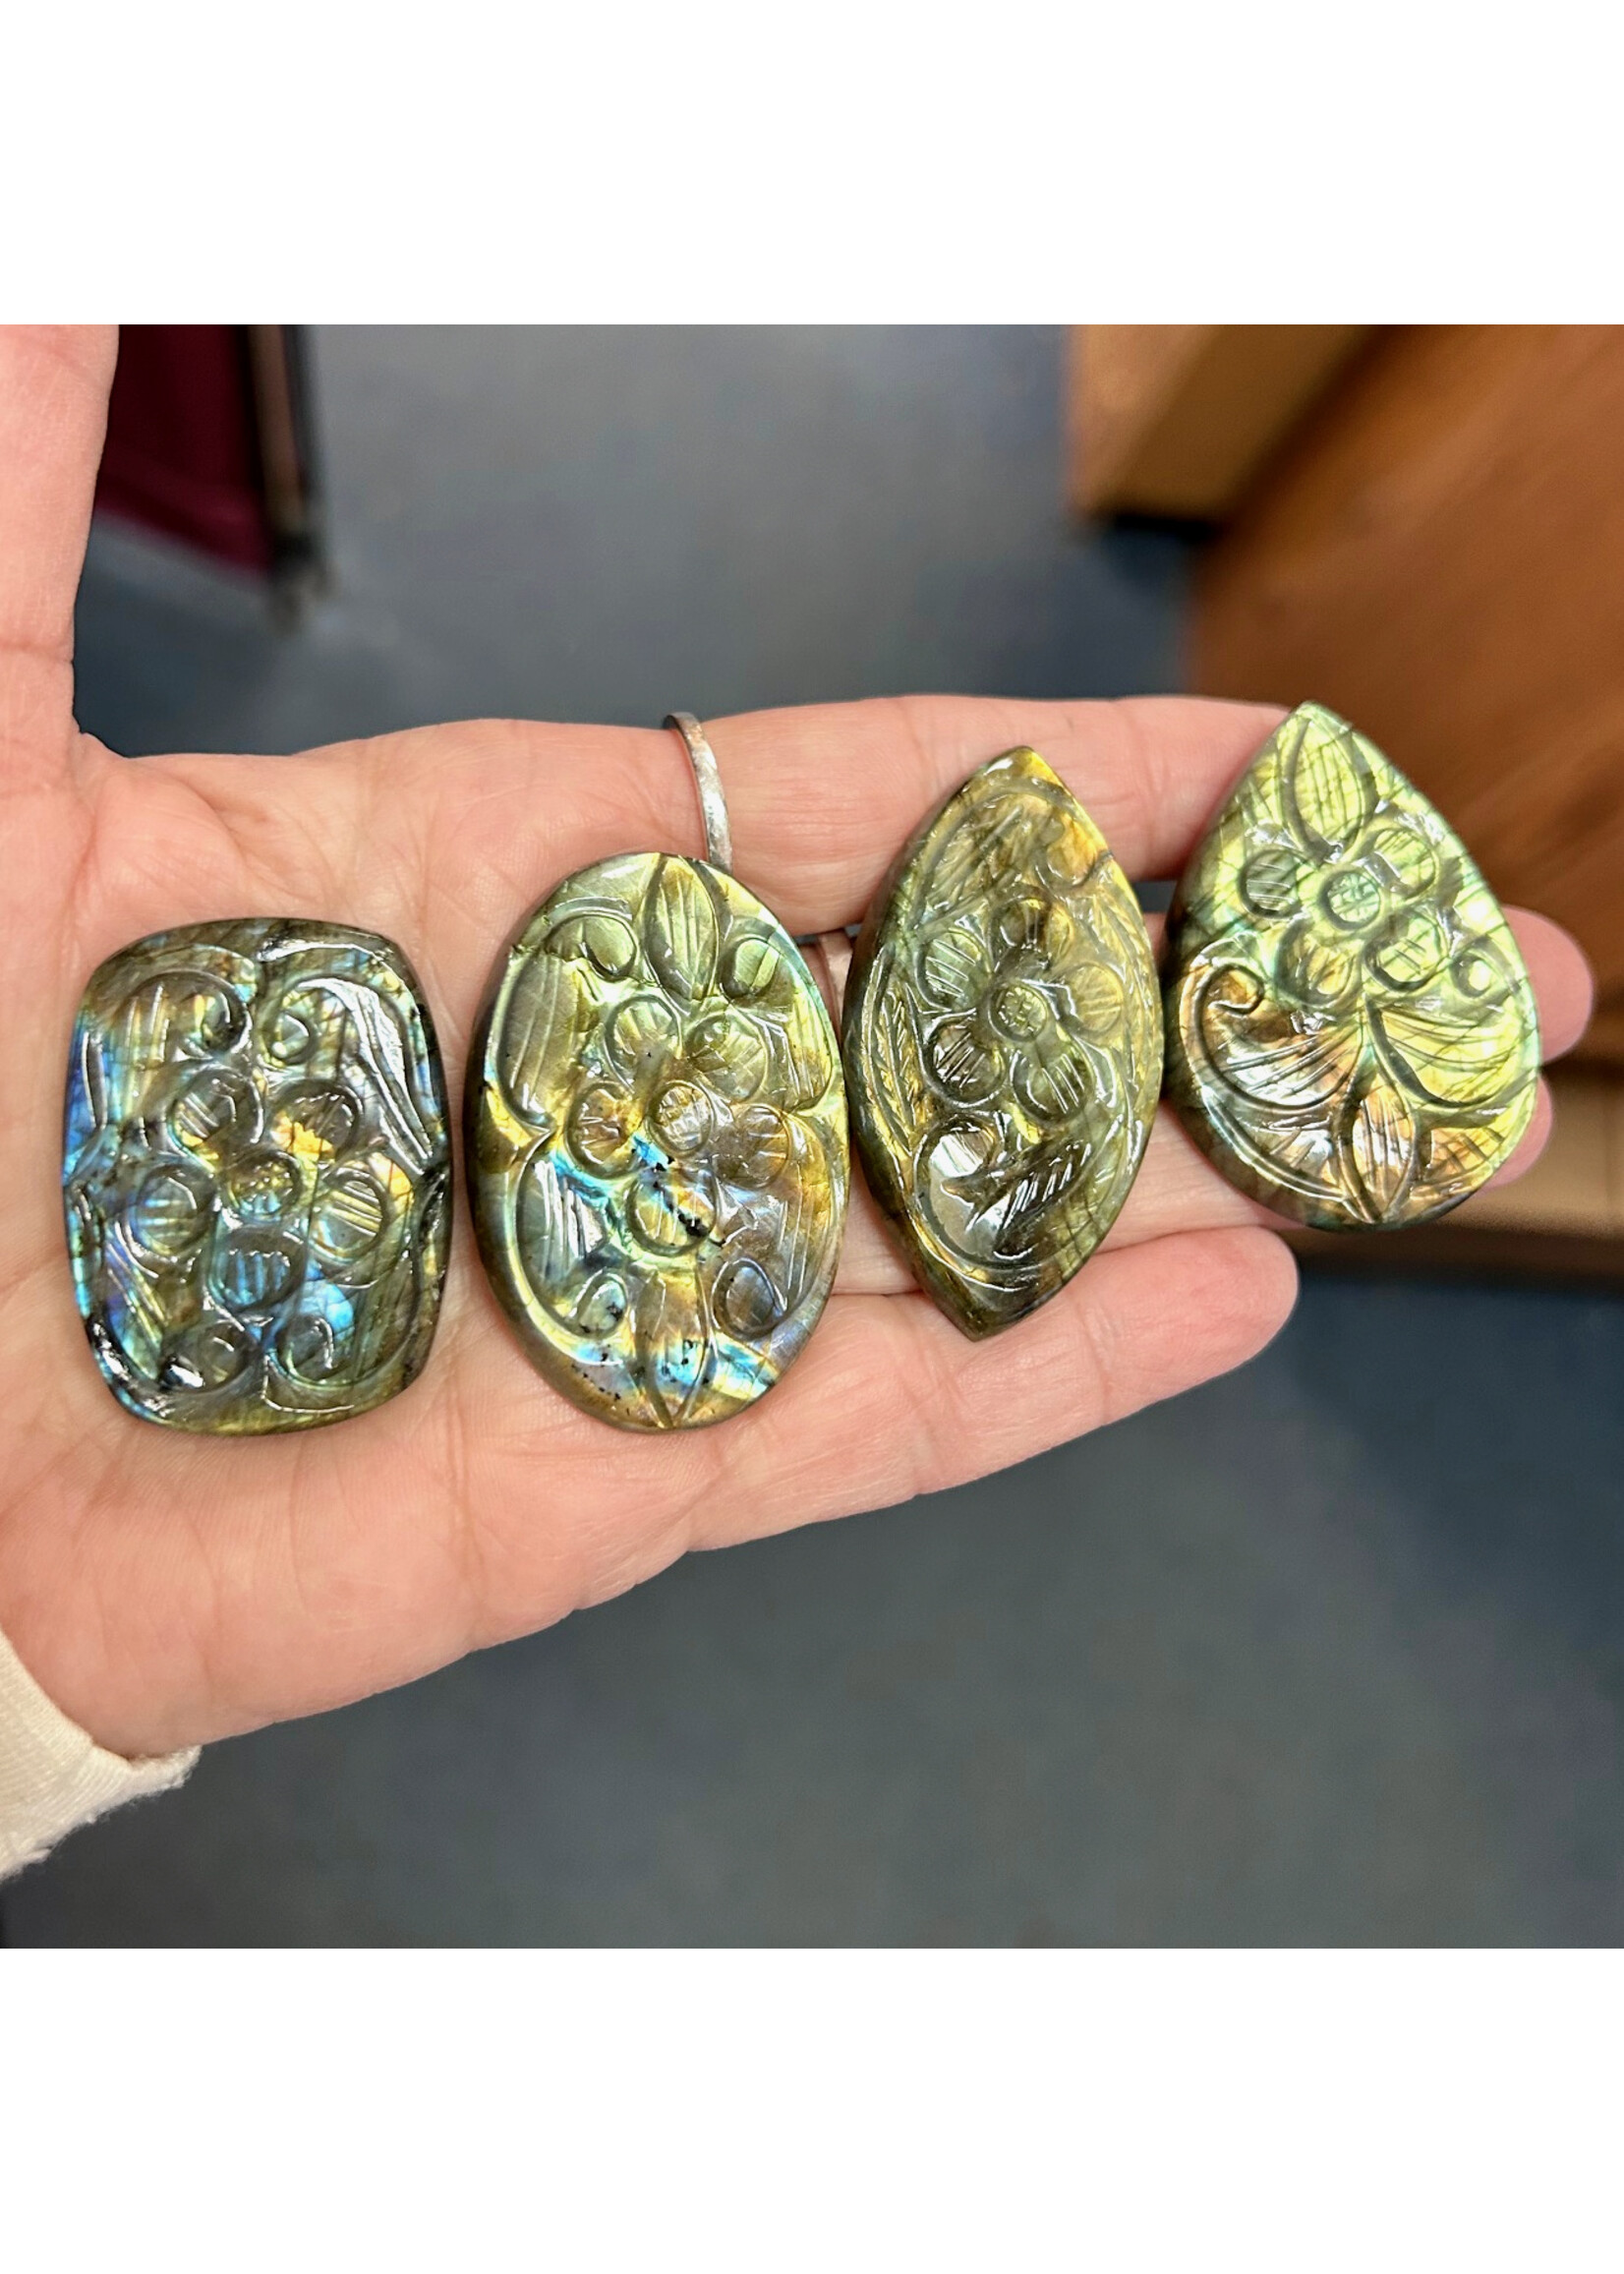 Labradorite Flower Cabochons for magical blooming